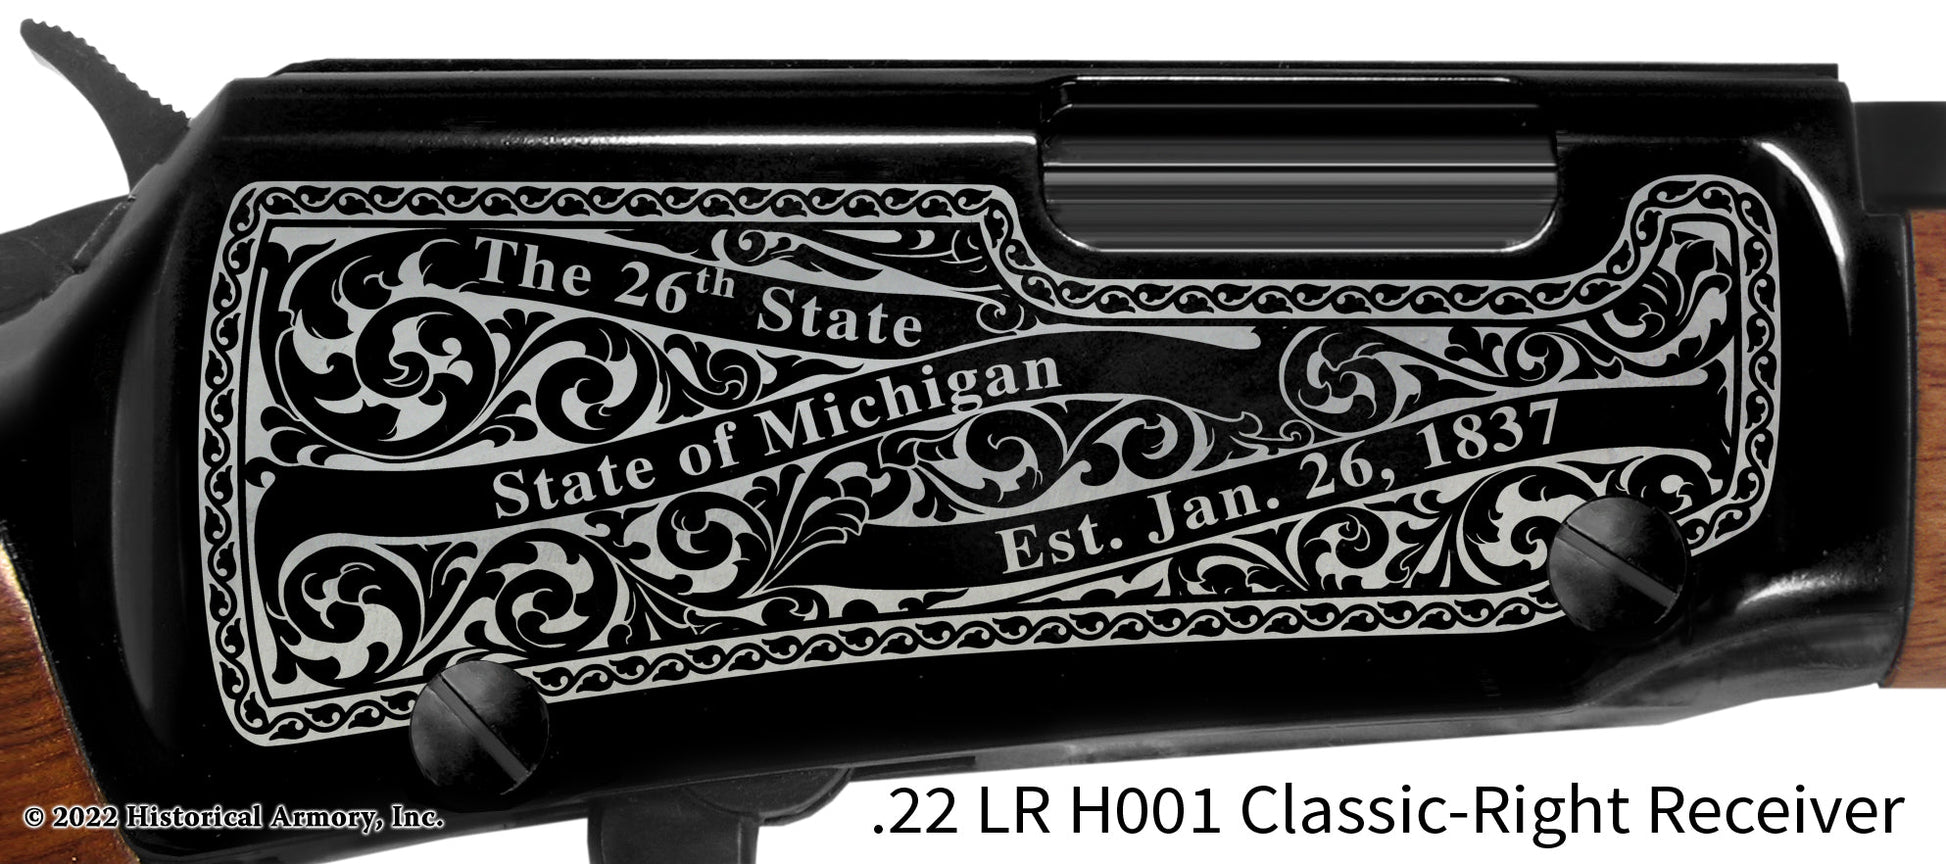 Cass County Michigan Engraved Henry H001 Rifle